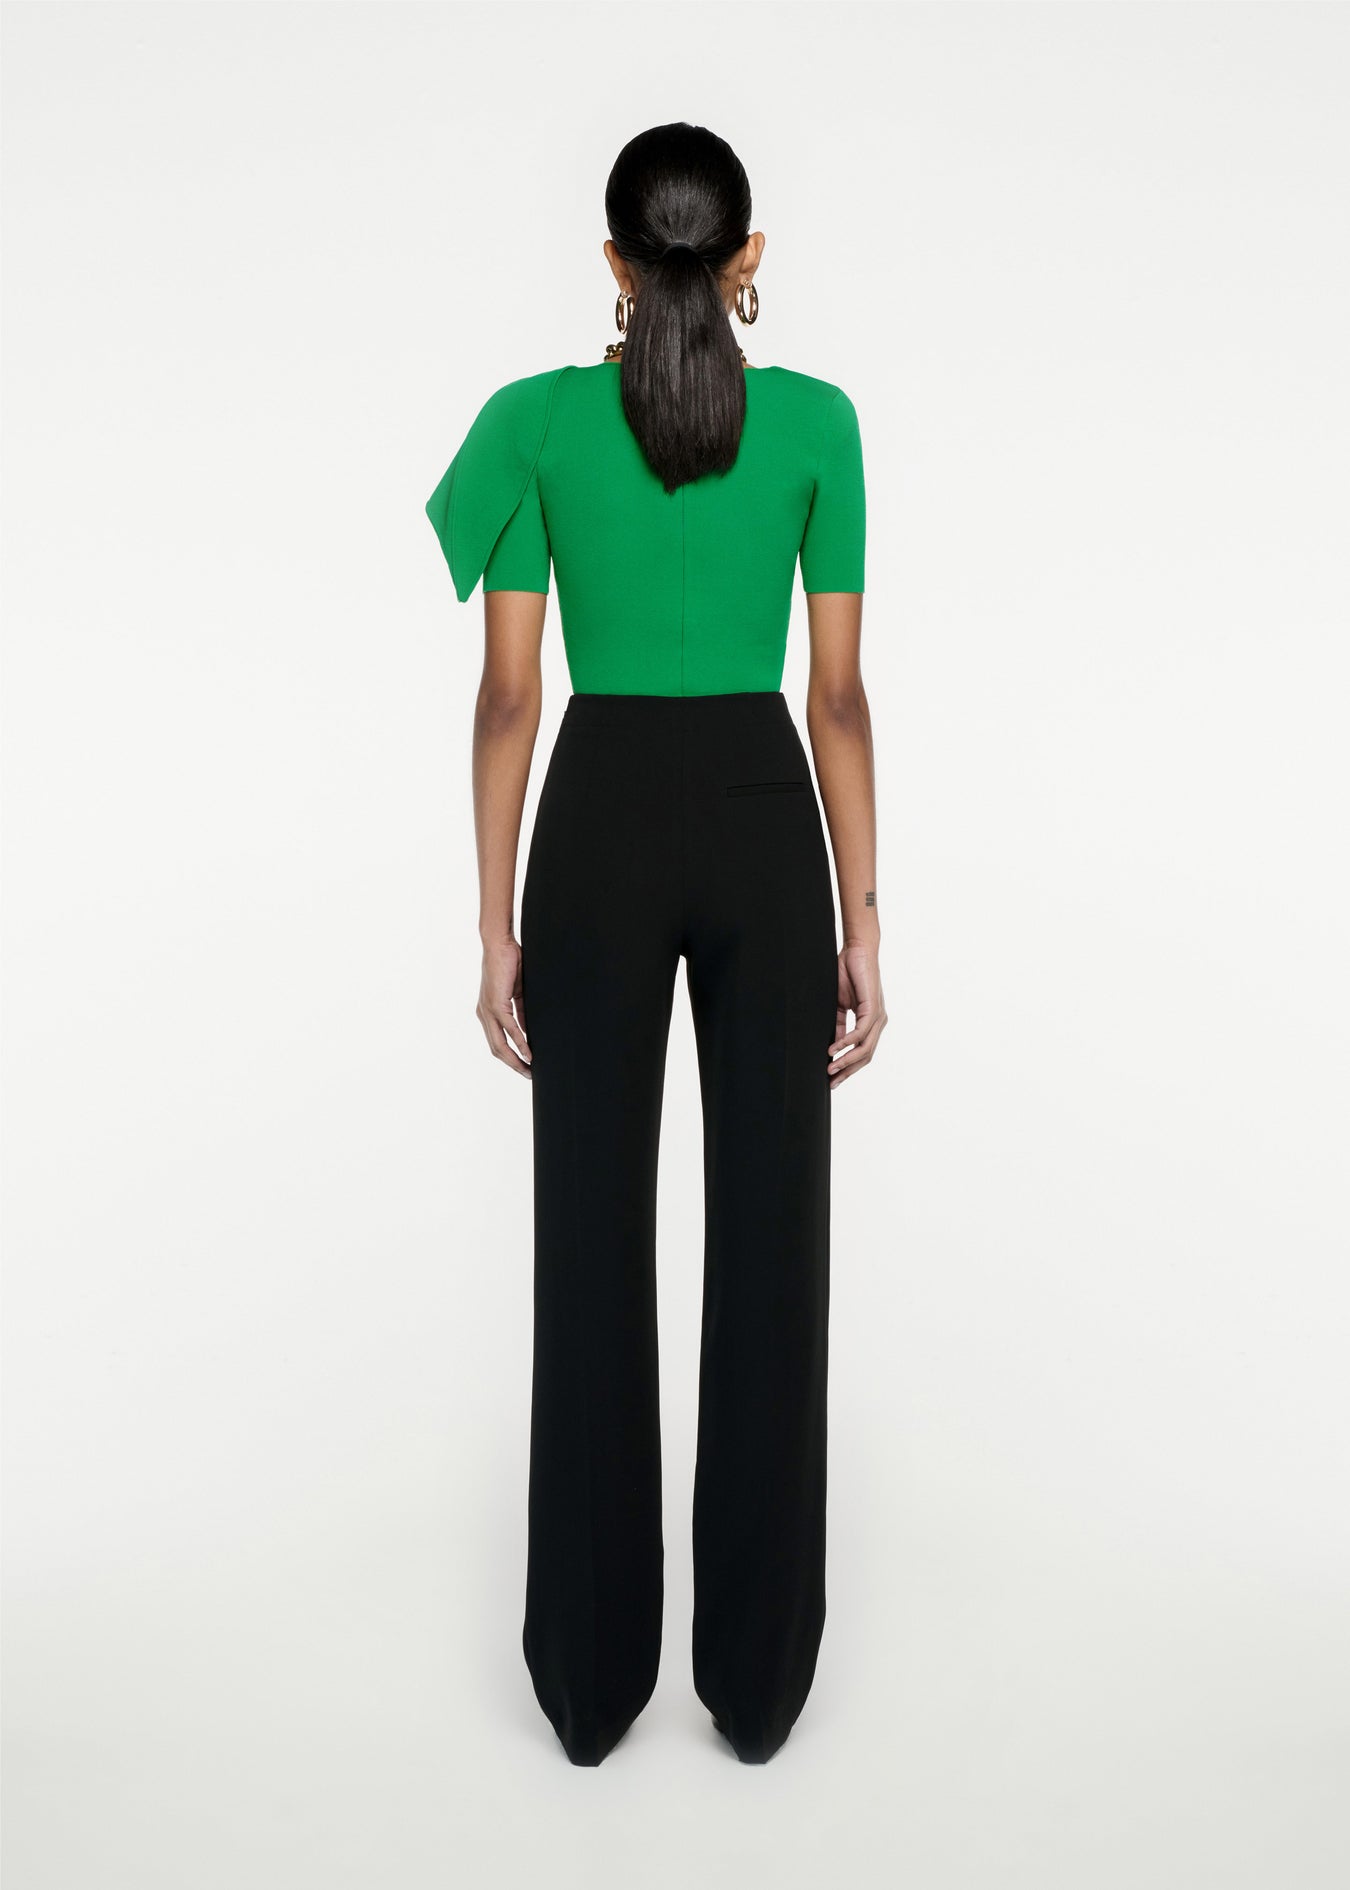 Woman wearing the Short Sleeve Knit Top in Green